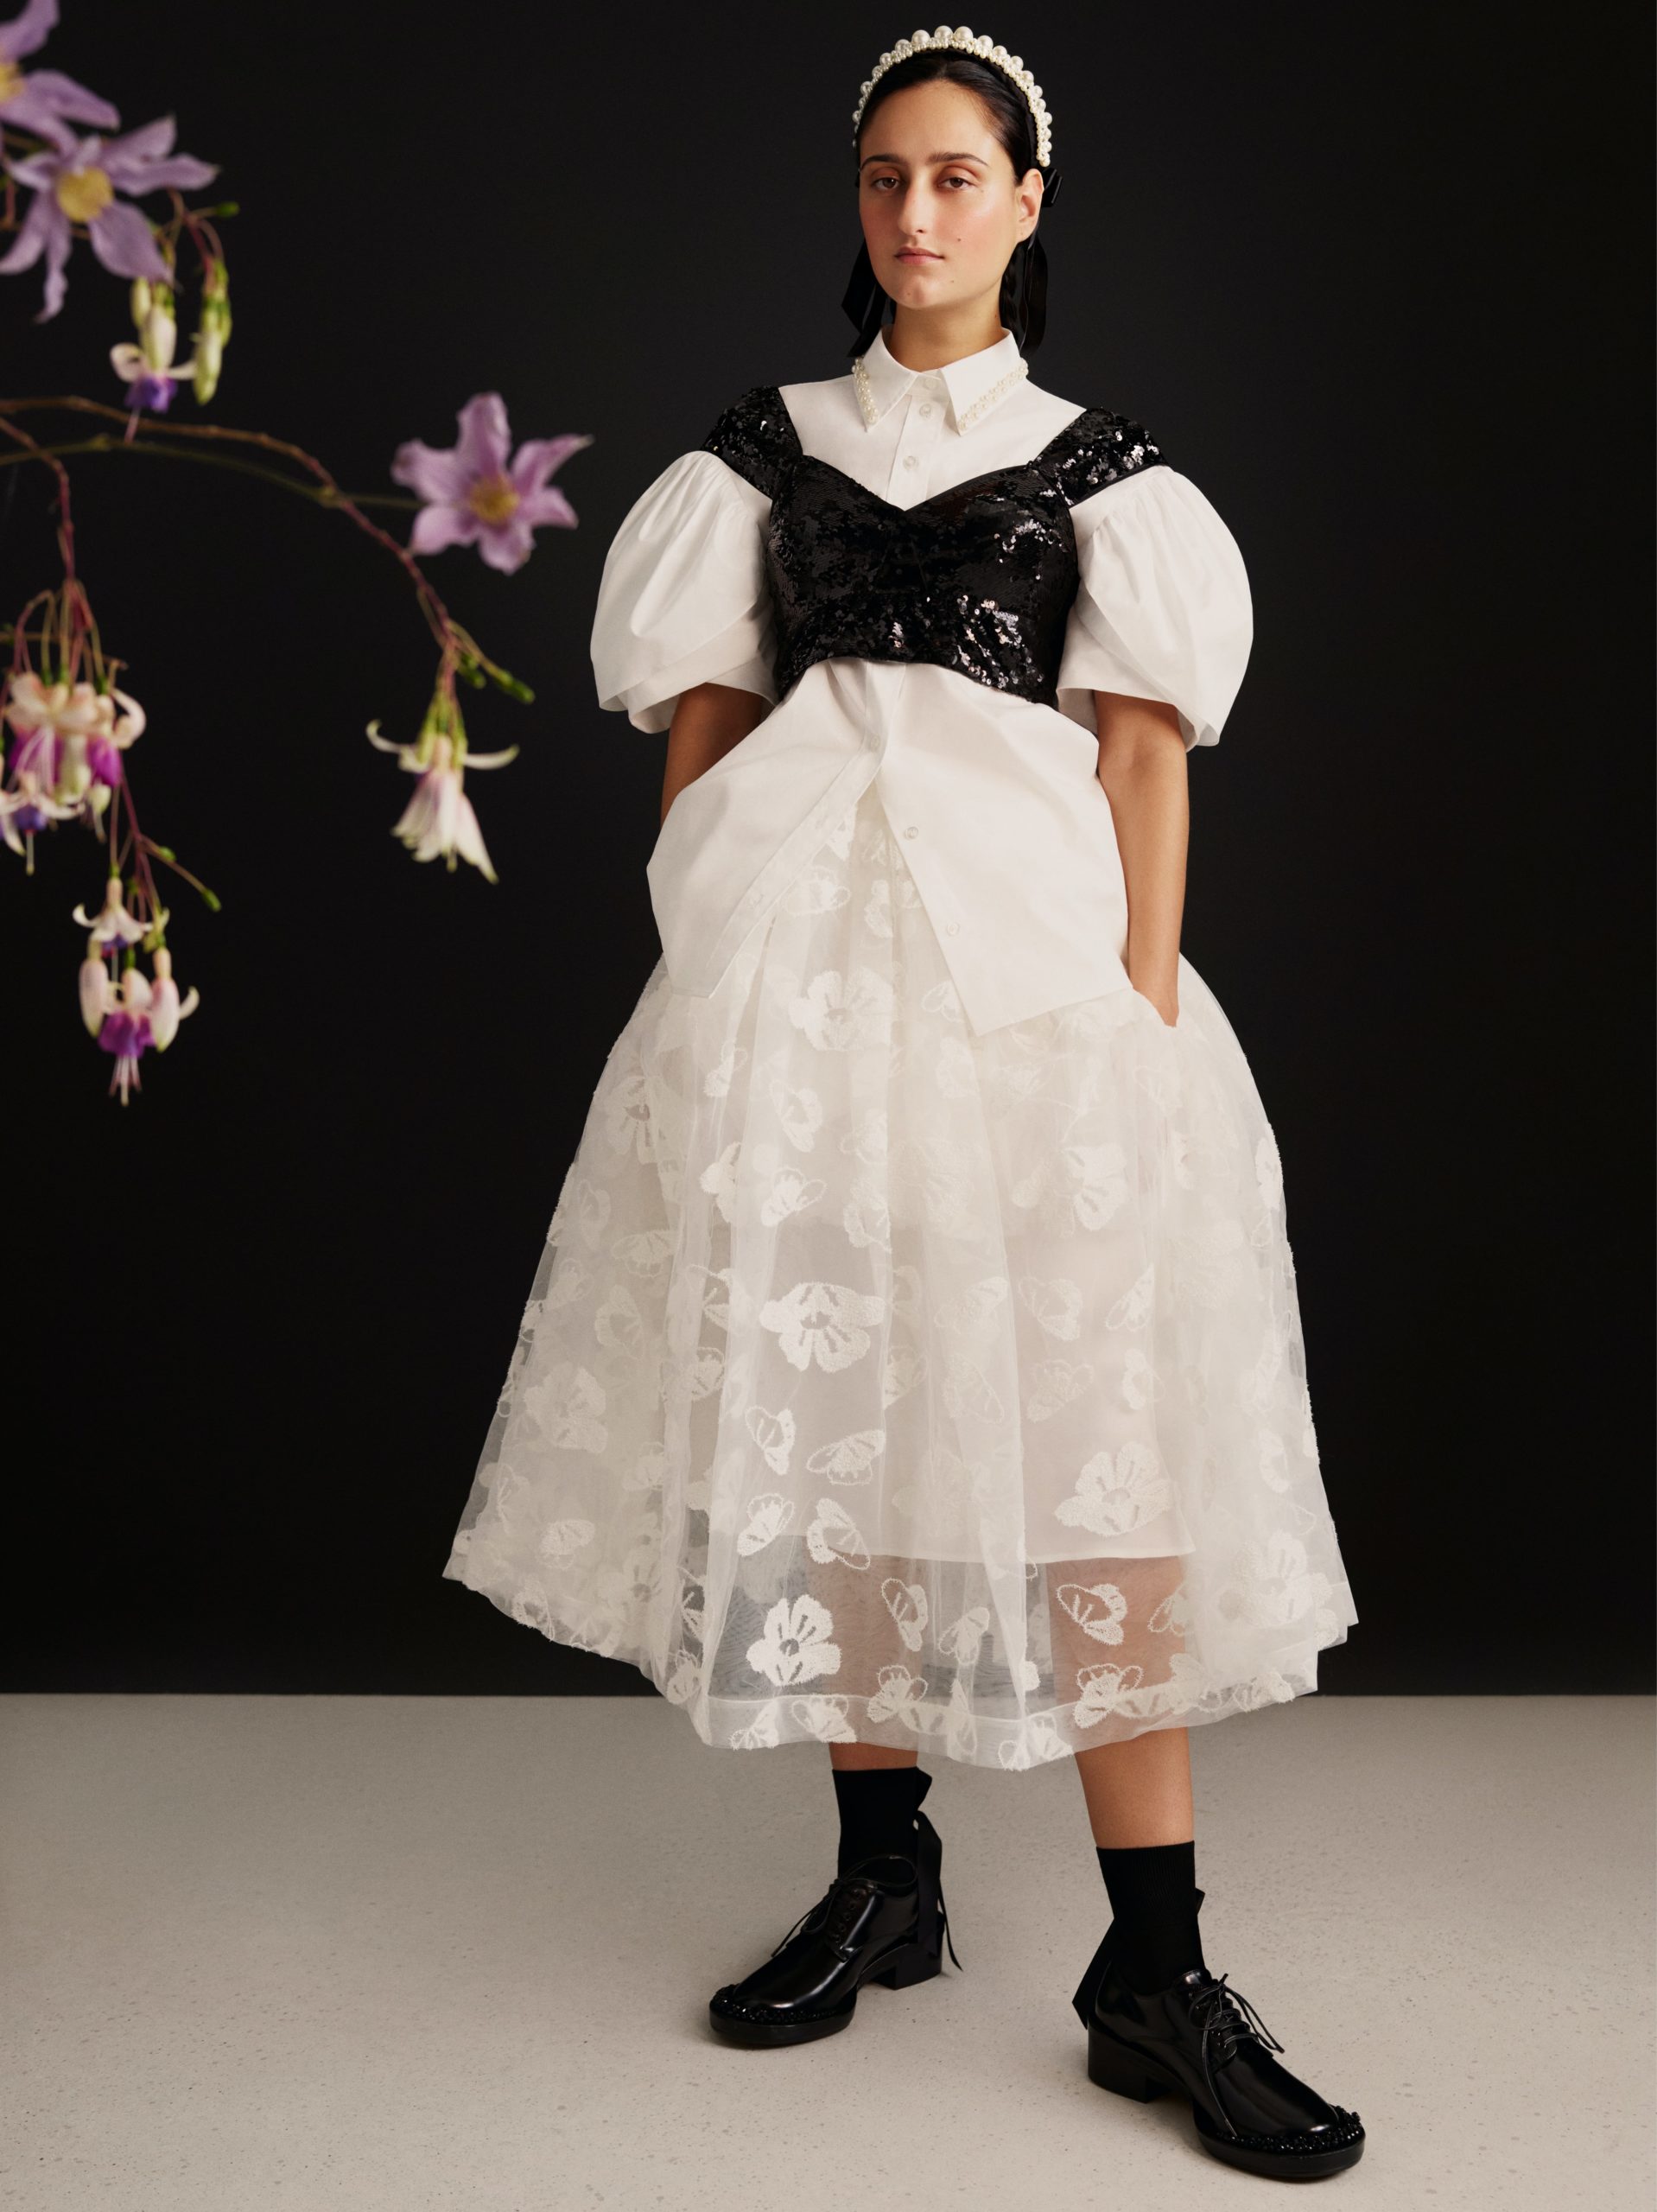 The story behind Simone Rocha's exclusive collaboration with H&M